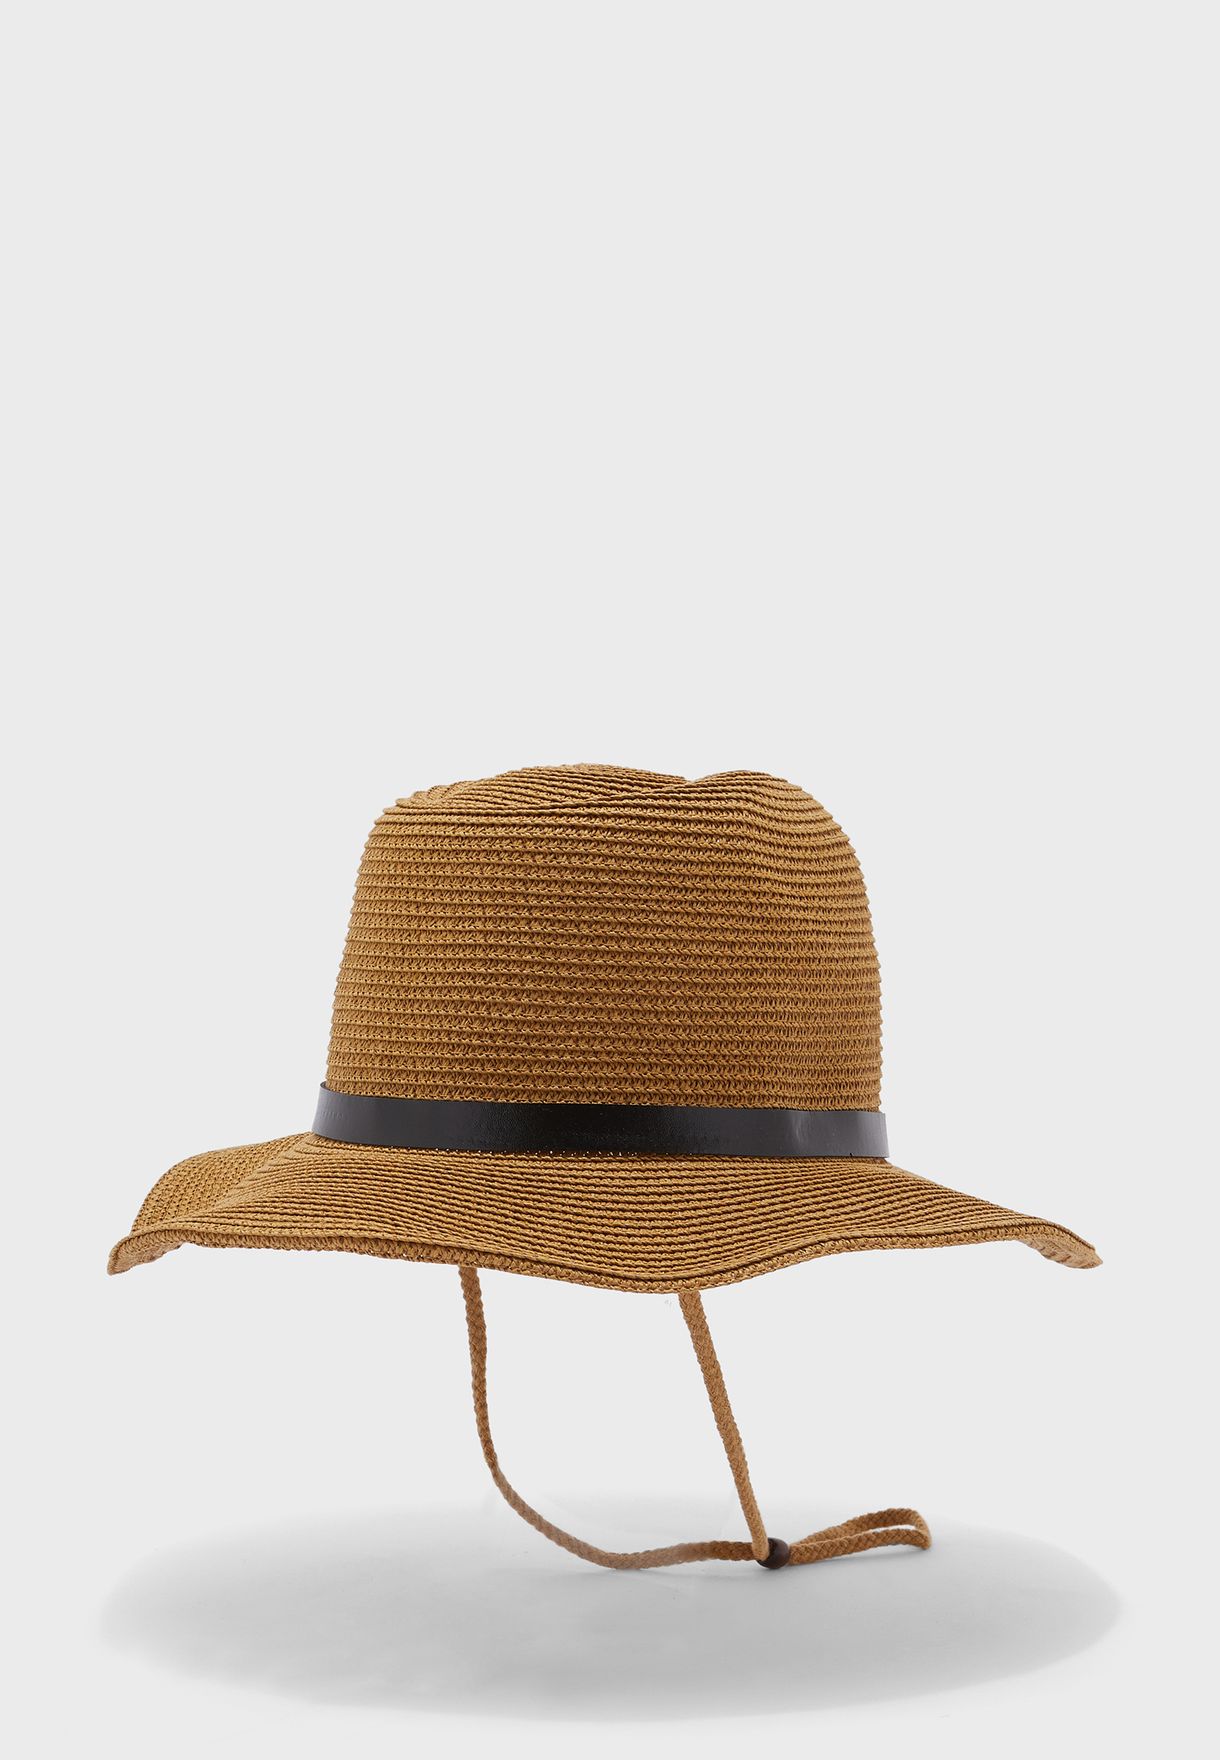 Straw Cowboy Hat With String 